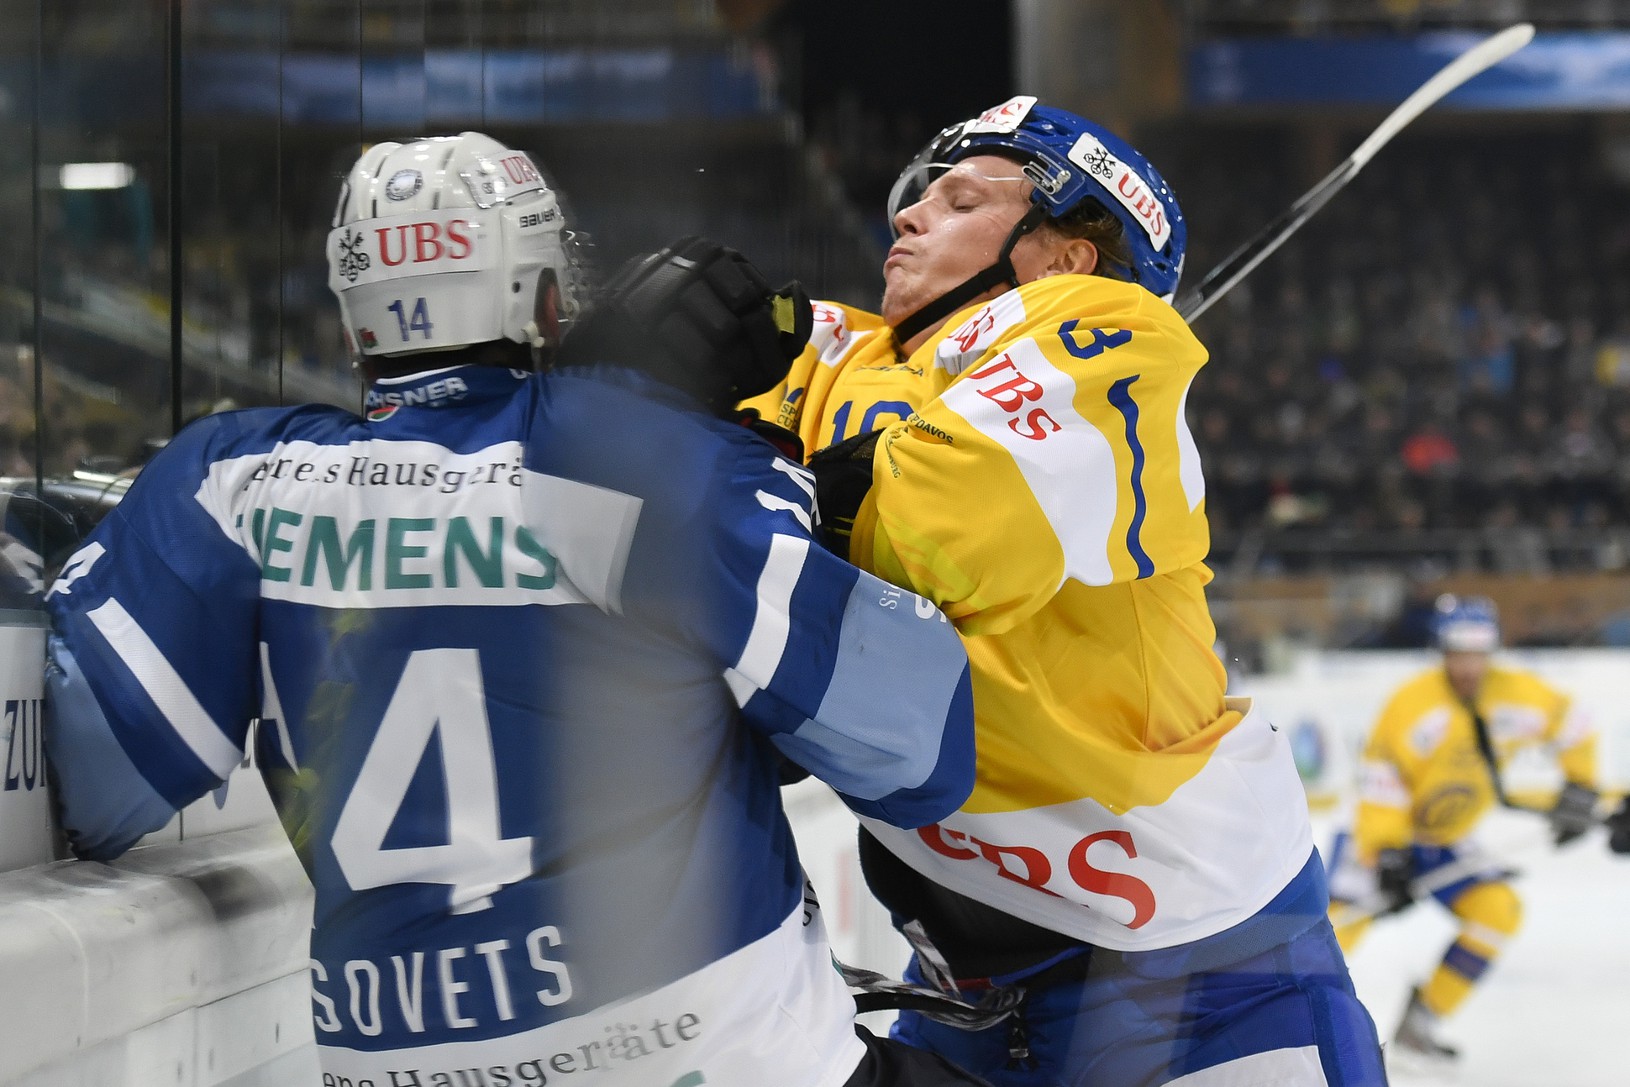 Evgeny Lisovets a Gregory